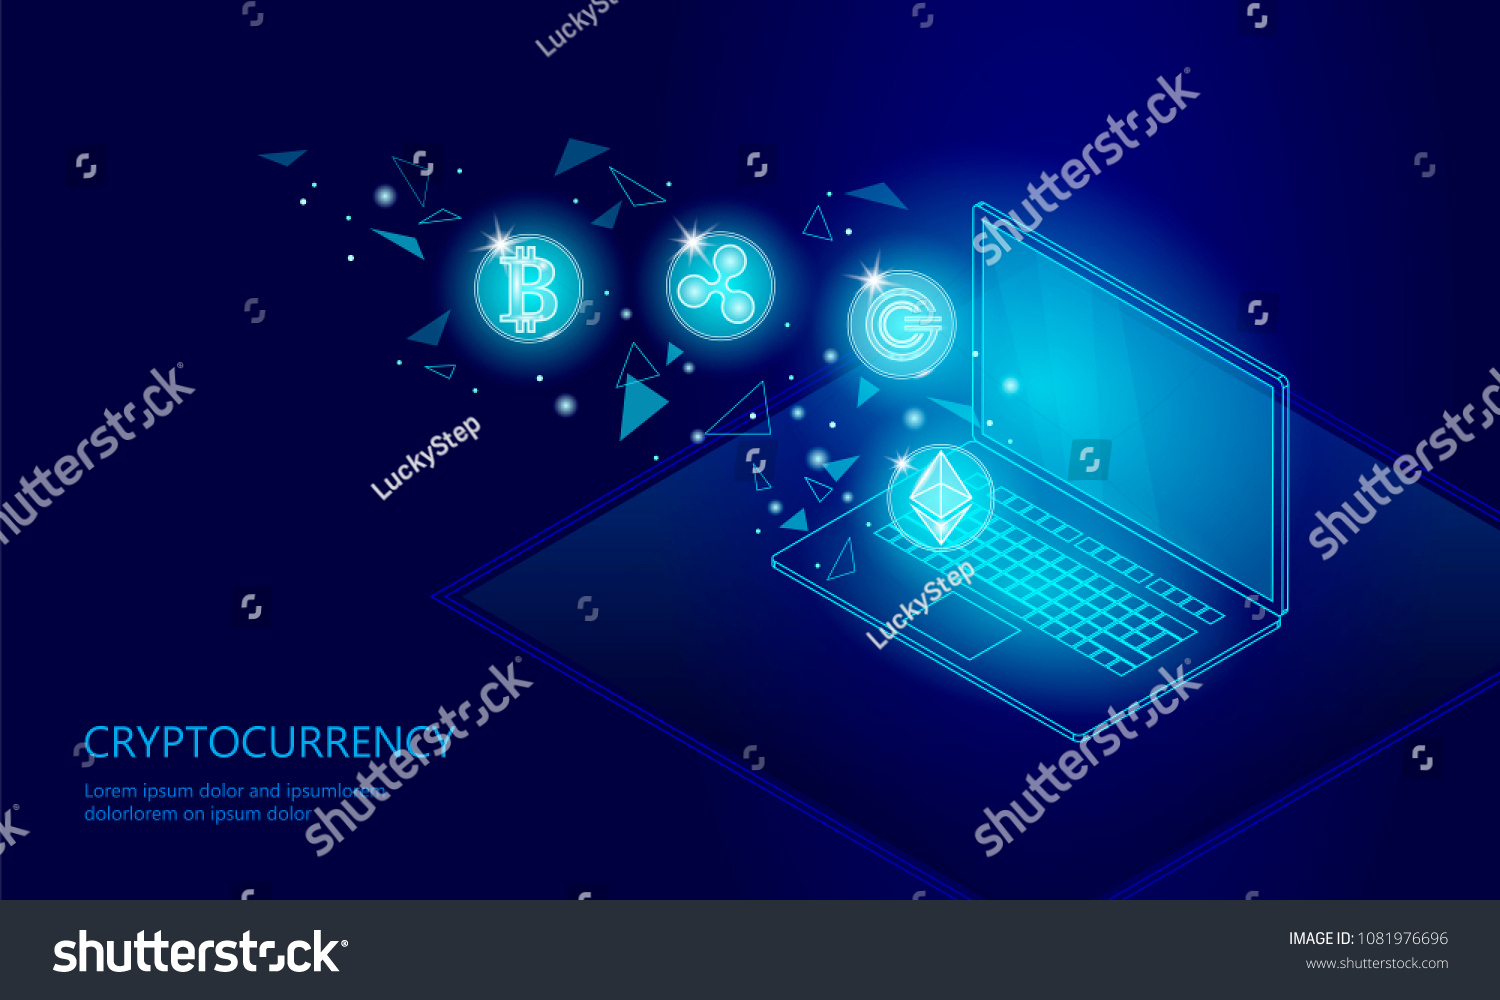 SVG of Ethereum Bitcoin Ripple coin digital cryptocurrency laptop pc cell web online payment. Big data information exchange technology. Blue isometric web internet electronic payment vector illustration svg